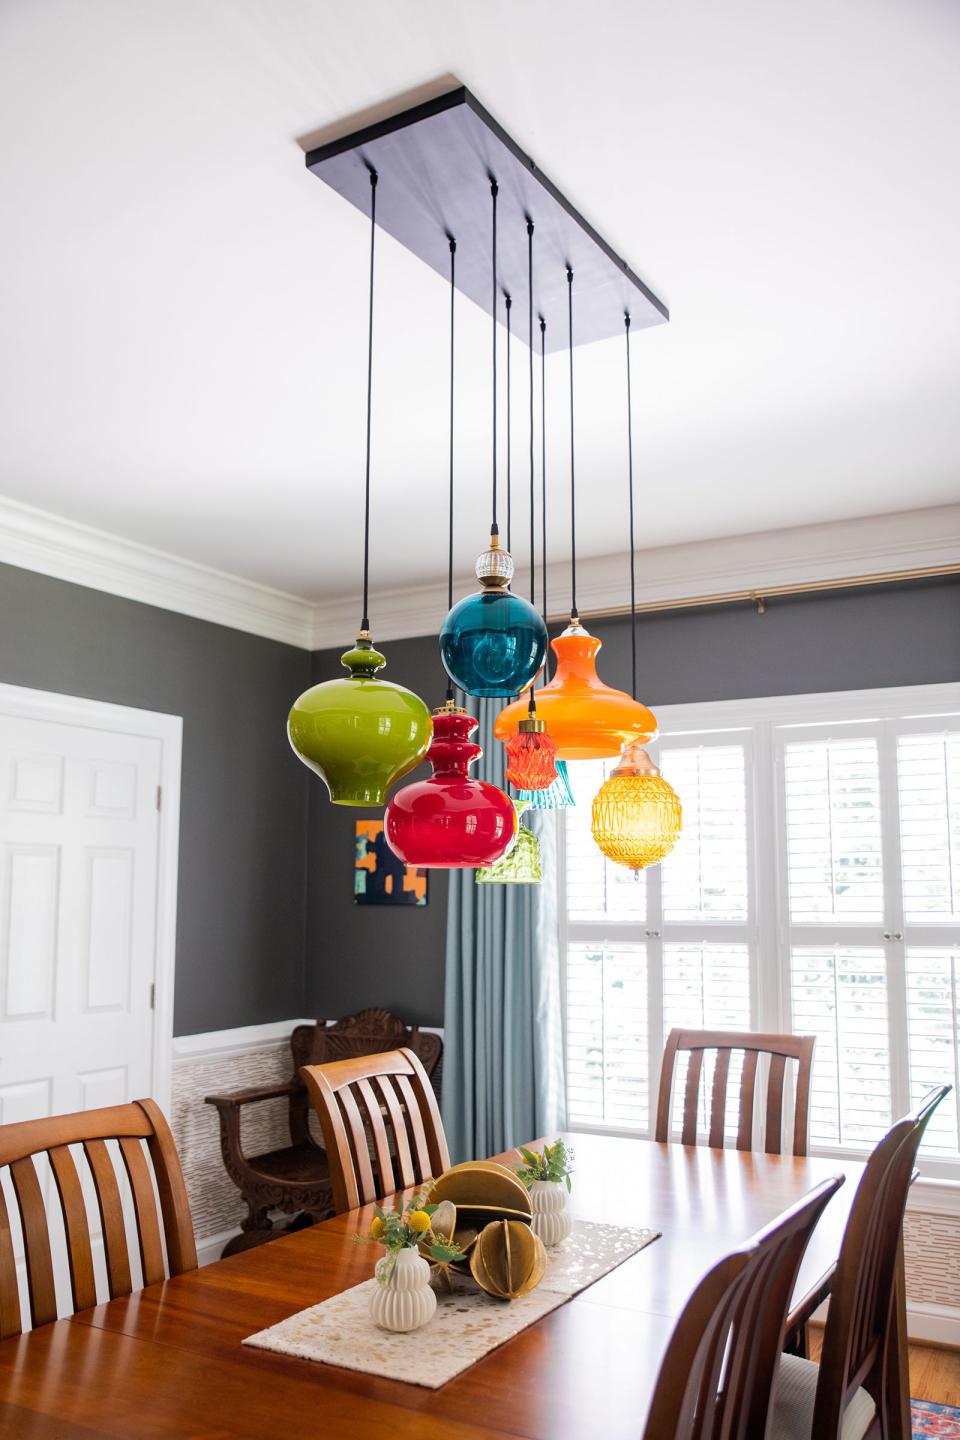 Serving as the focal point of the dining room, a custom-made light fixture was assembled using vintage colored glass pendants, resulting in a one-of-a-kind showpiece.